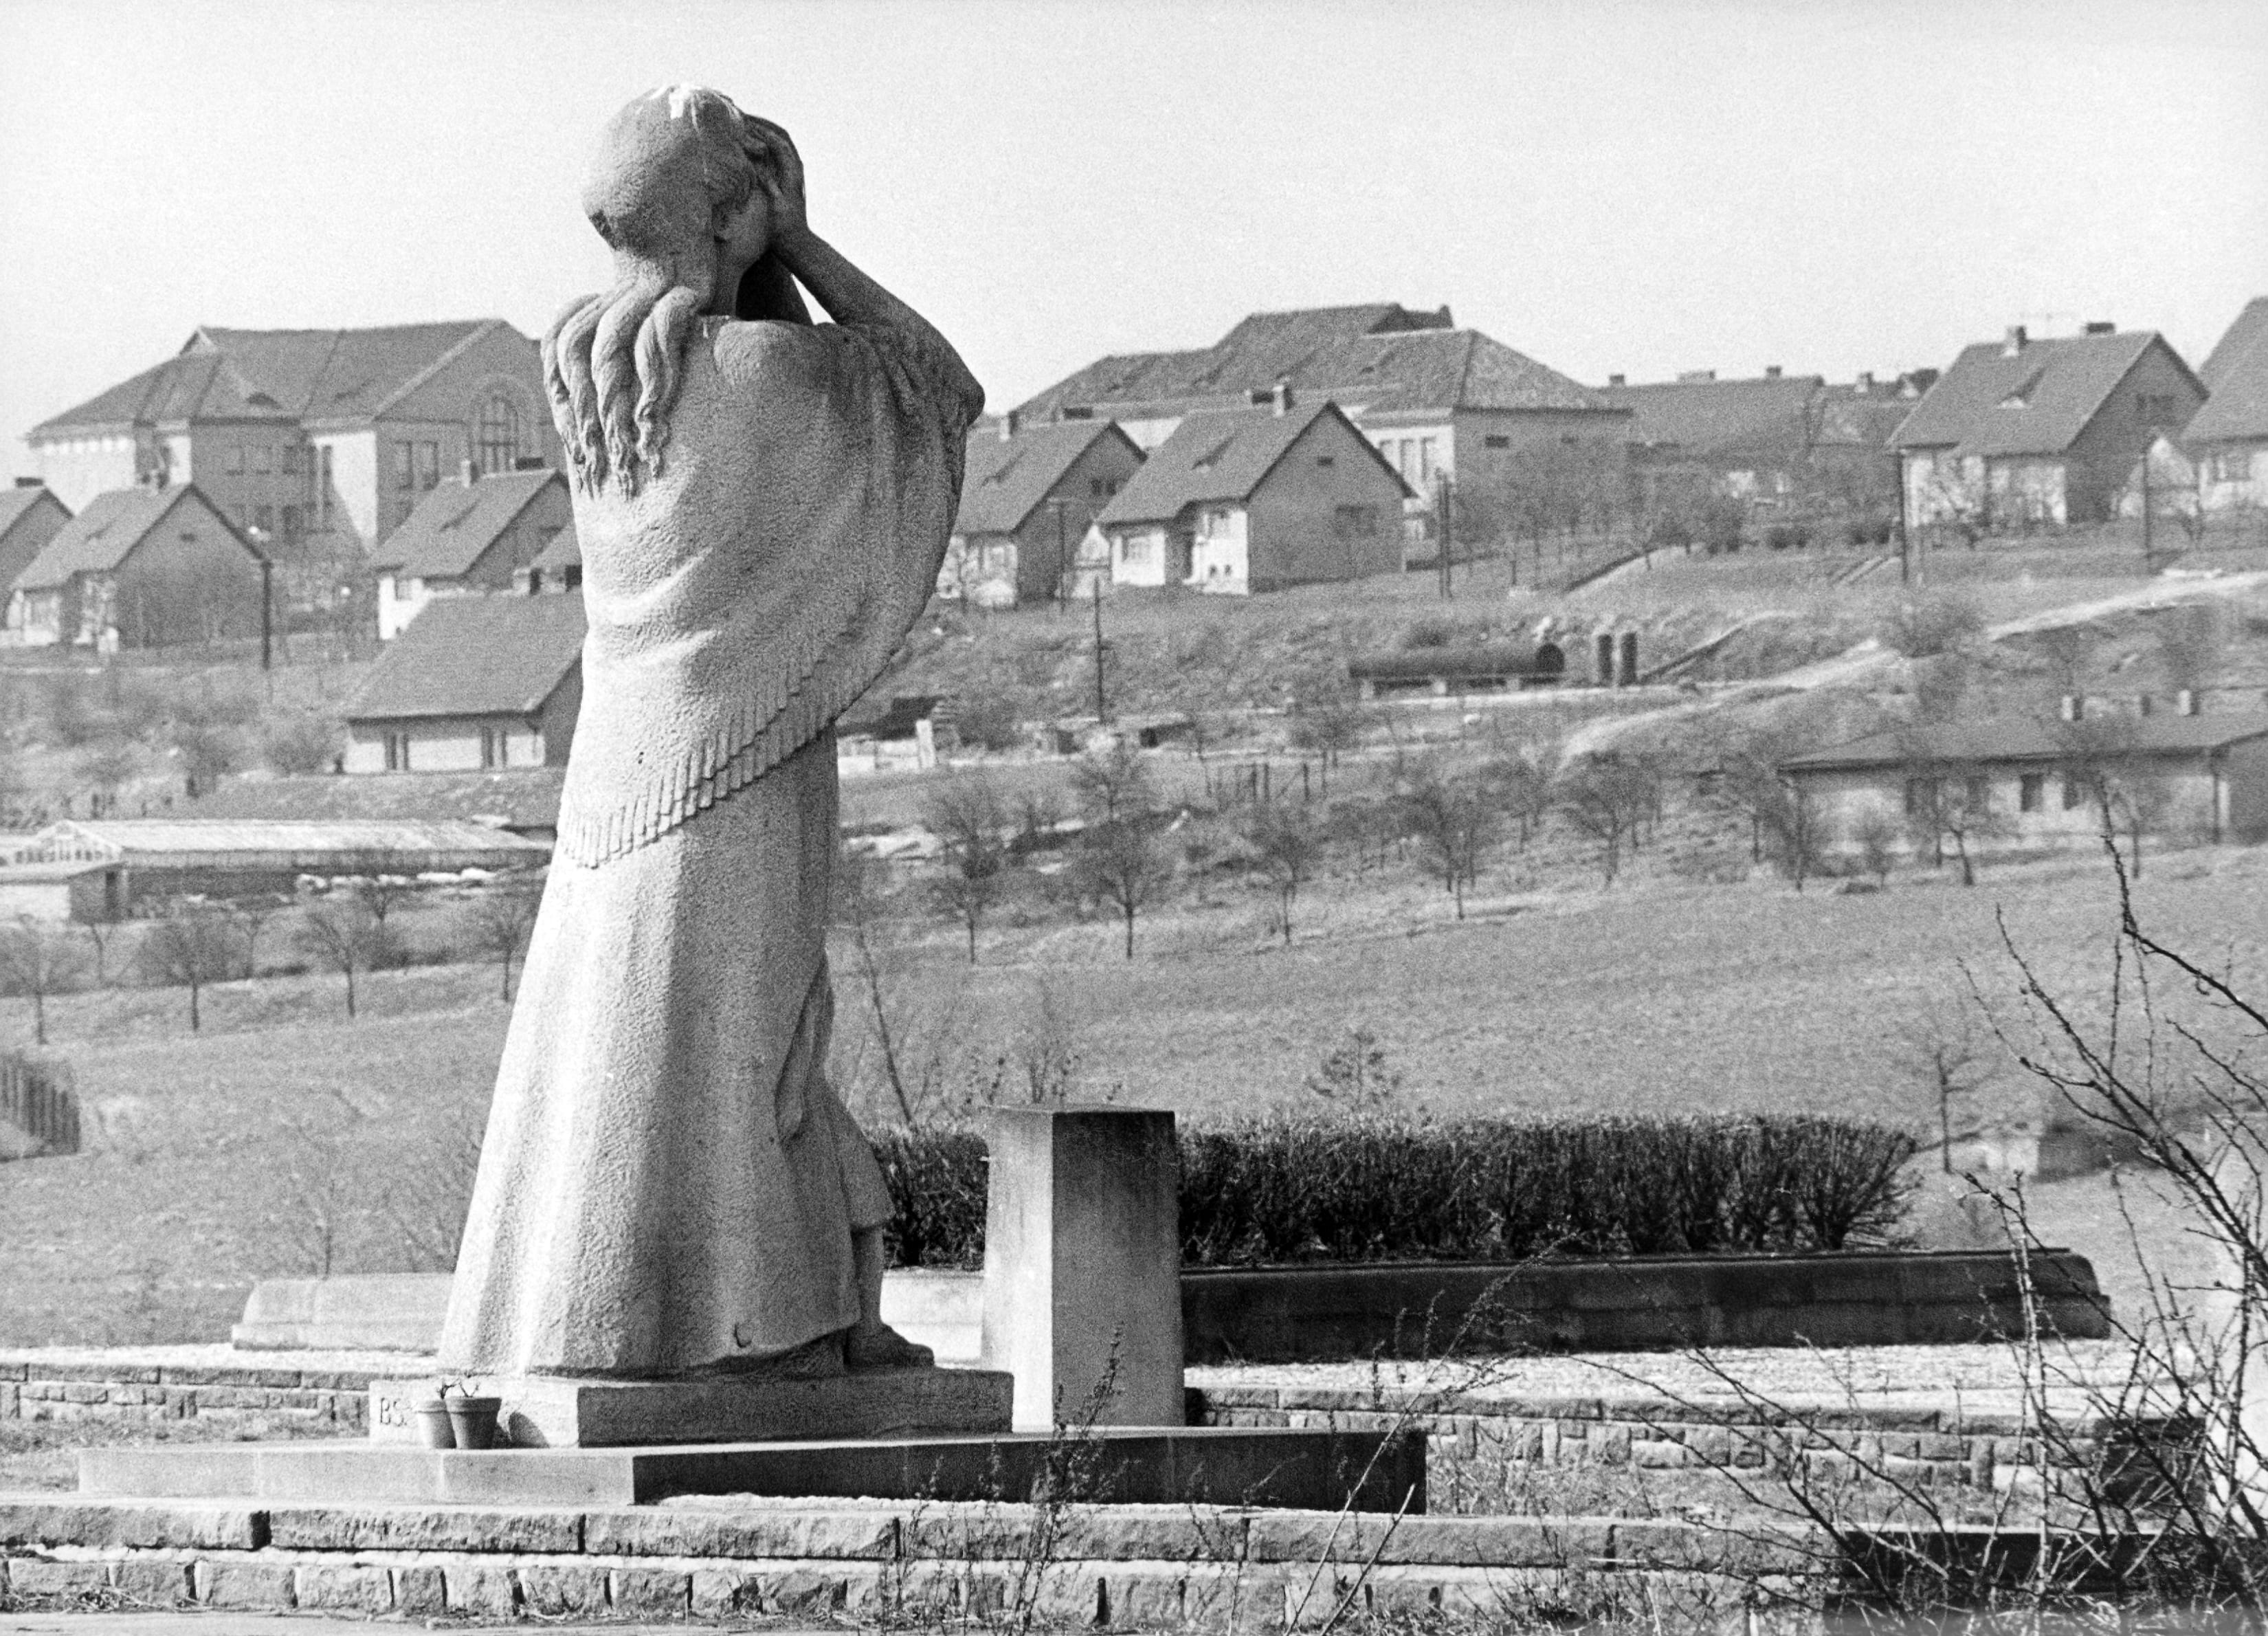 In the background is nove (new) Lidice on May 15, 1967, built after the war. In the foreground is the statue of a woman protecting her face from flames on the site of the village school, burned by Nazi troops. (AP Photo)